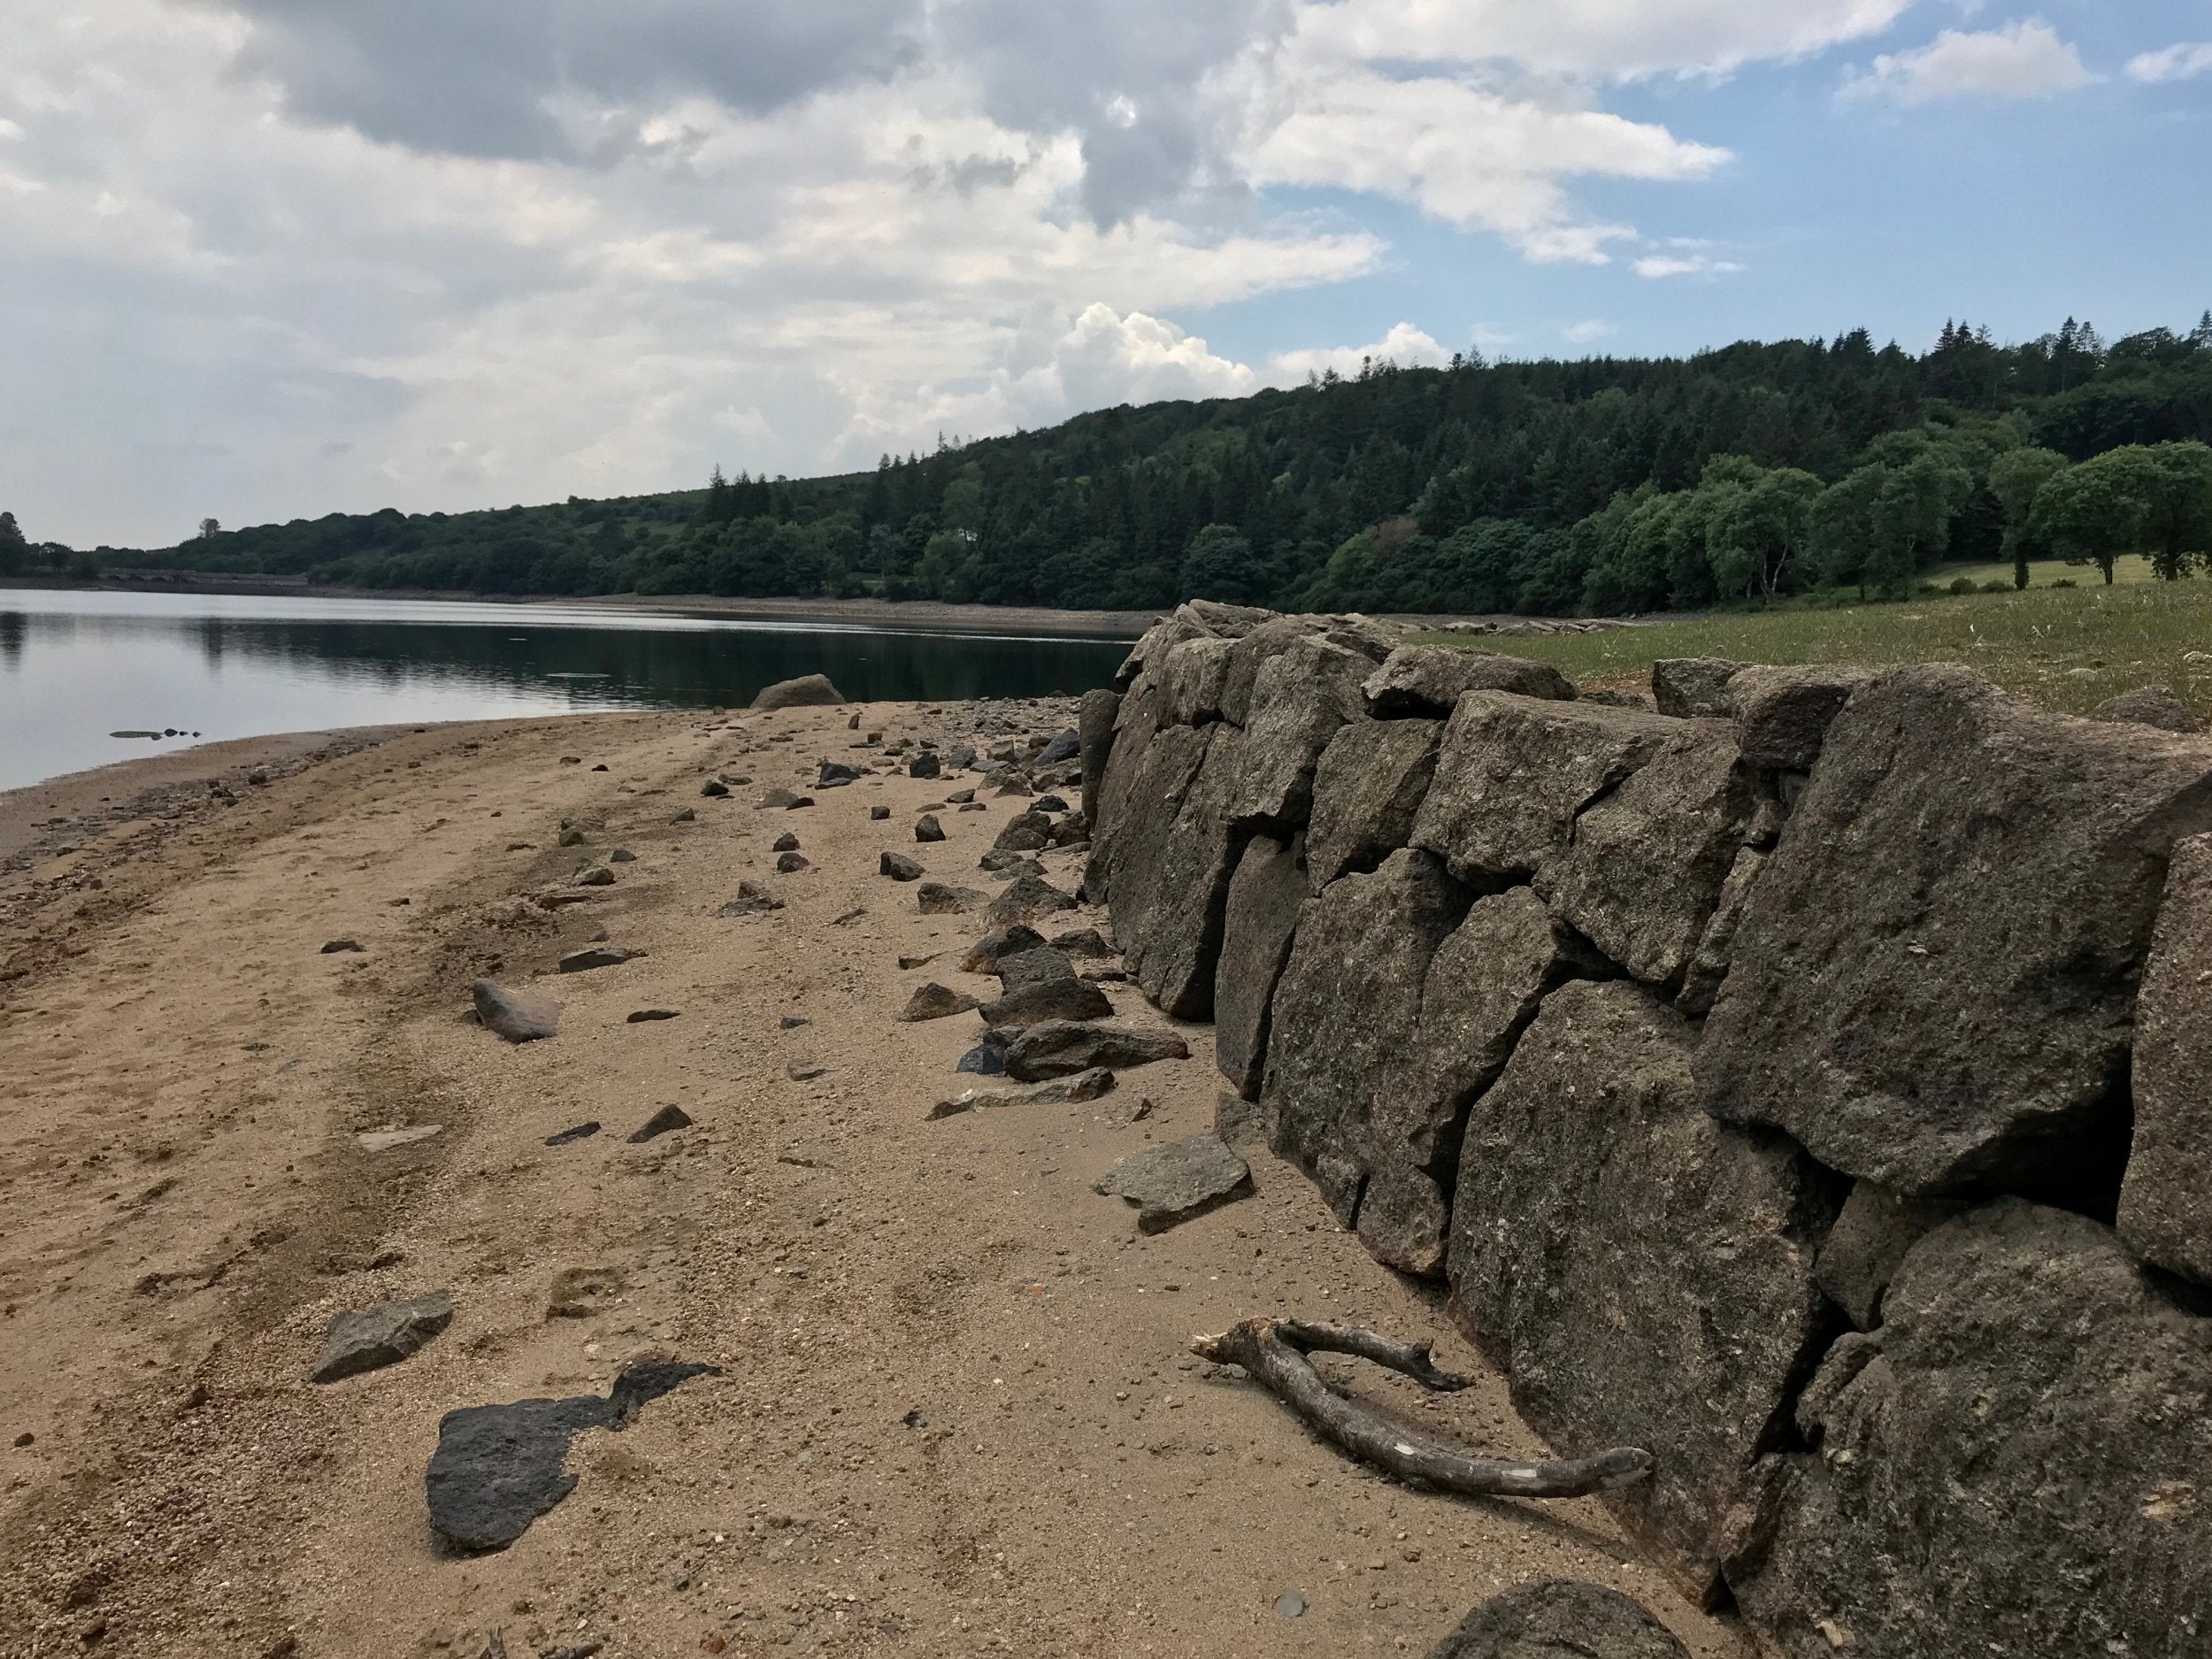 Hidden &apos;drowned village&apos; revealed after heatwave dries up reservoir